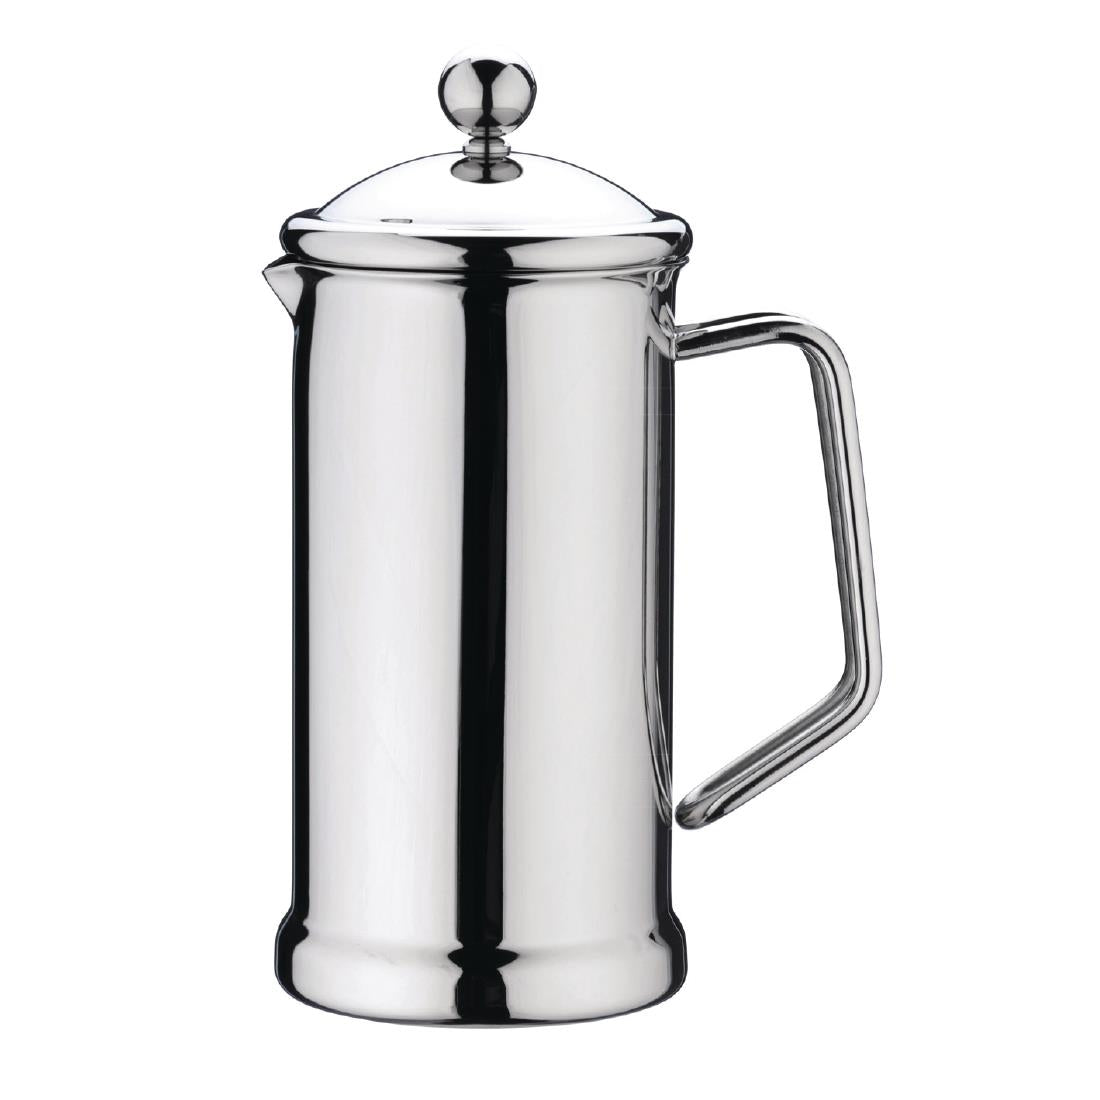 Polished Stainless Steel Cafetiere 8 Cup